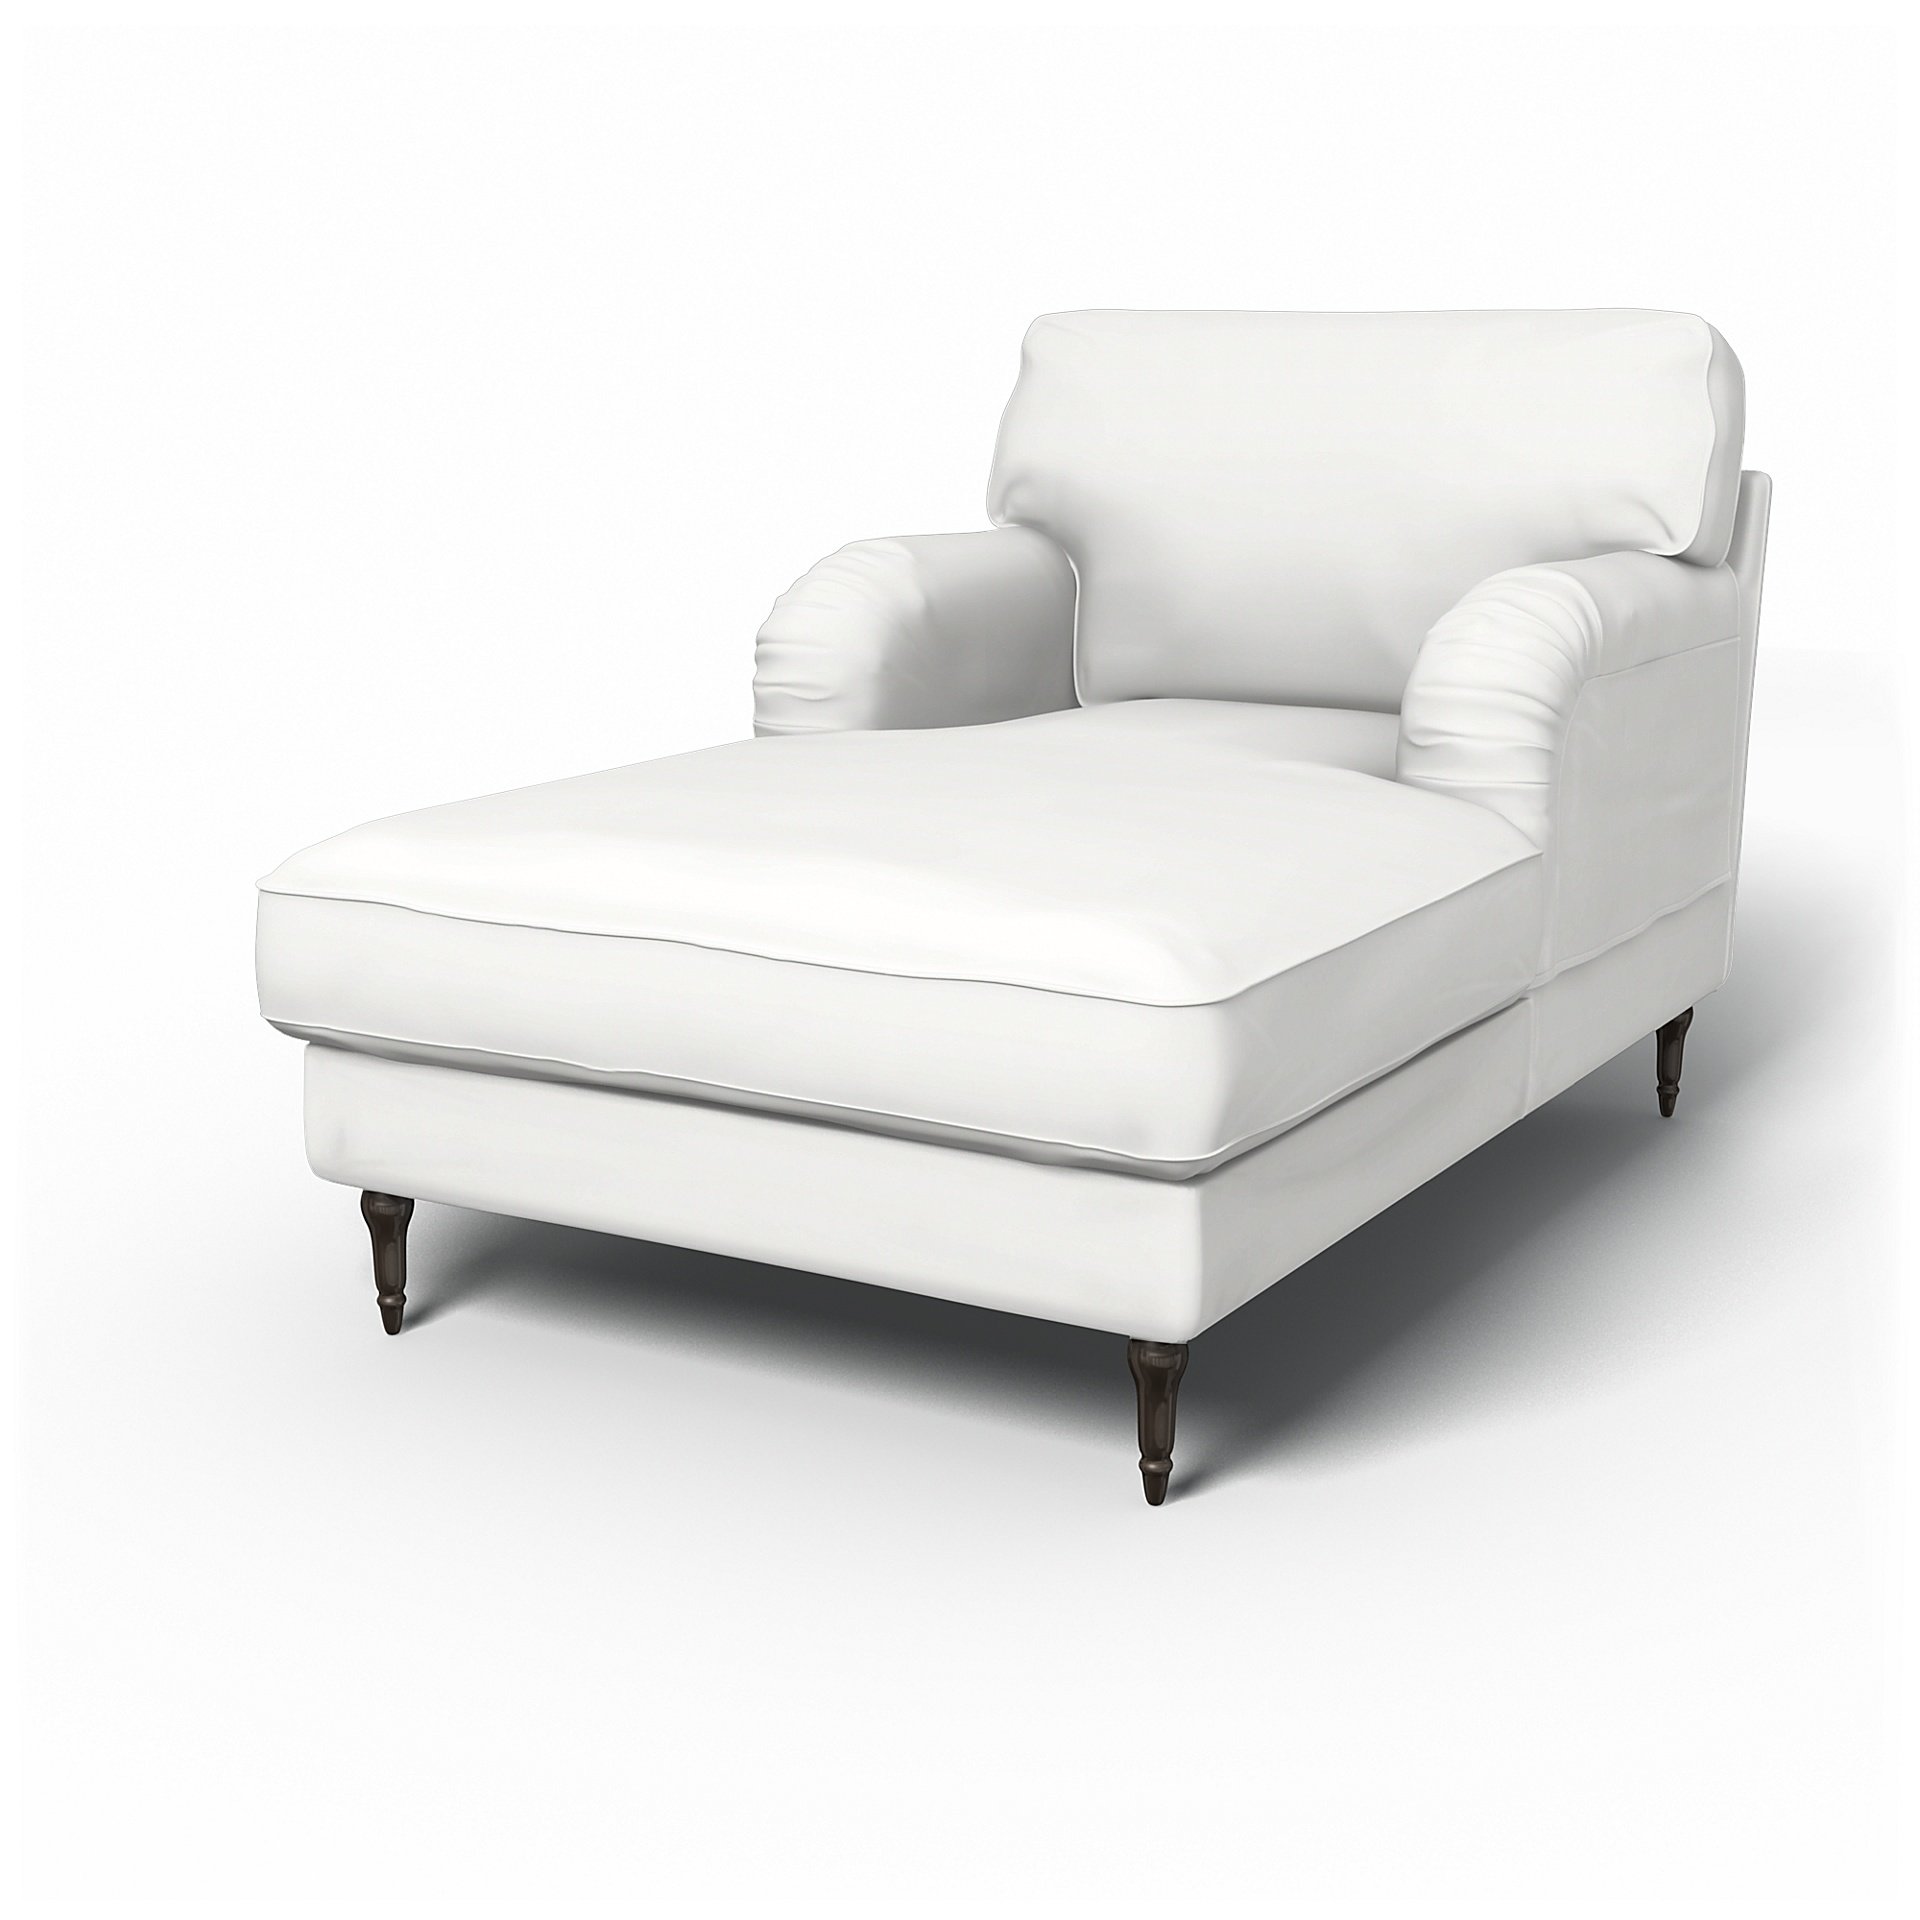 IKEA - Stocksund Chaise Longue Cover, Absolute White, Linen - Bemz